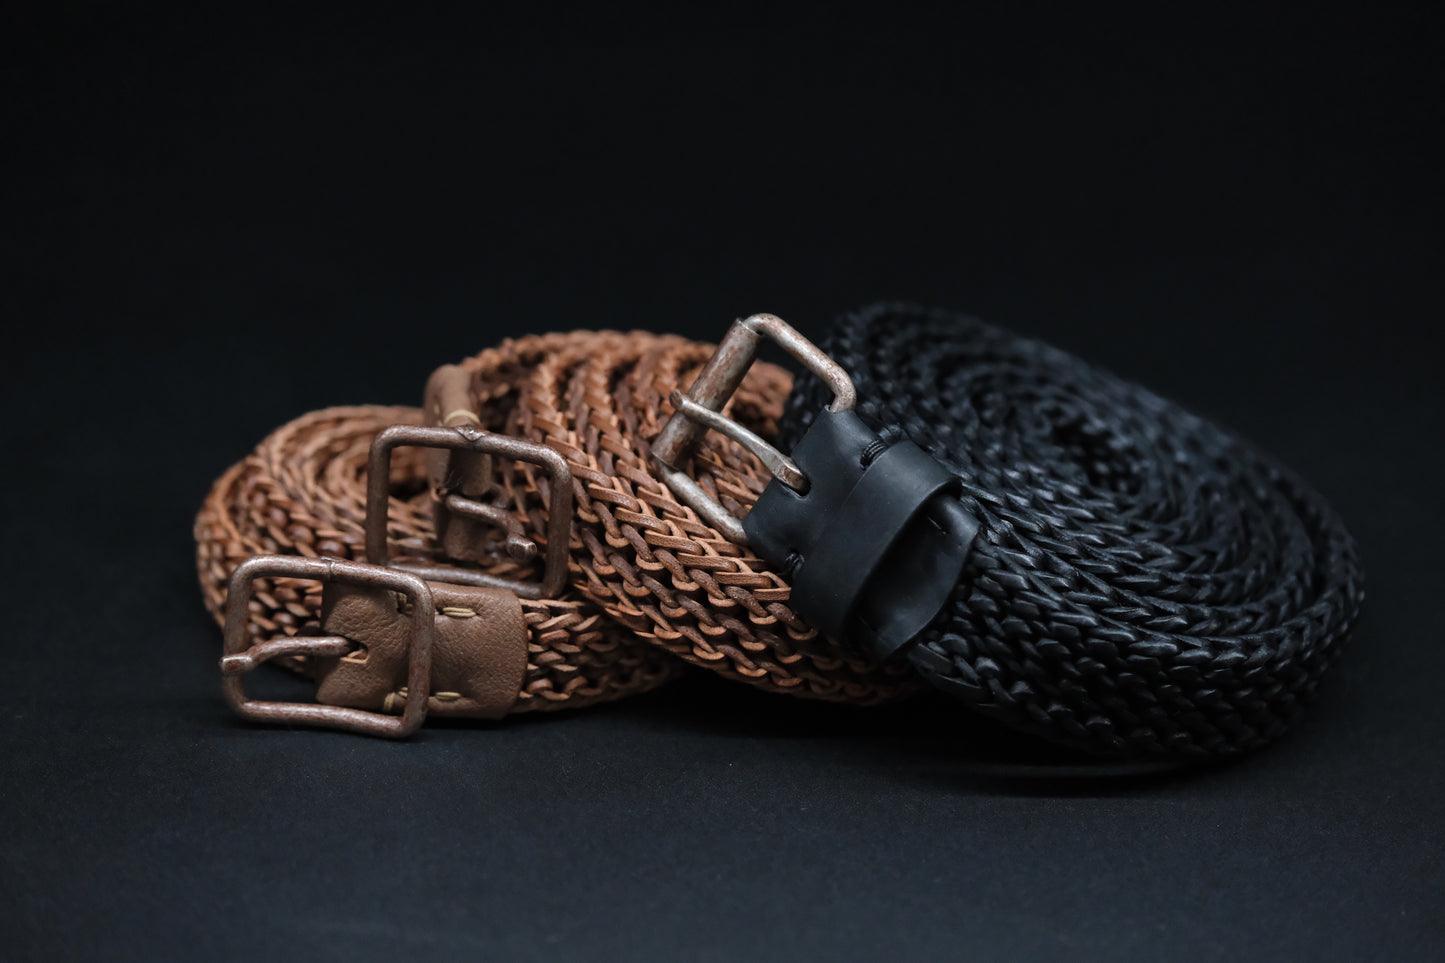 Womb Leather / Hand Knitted Leather Belt / Black